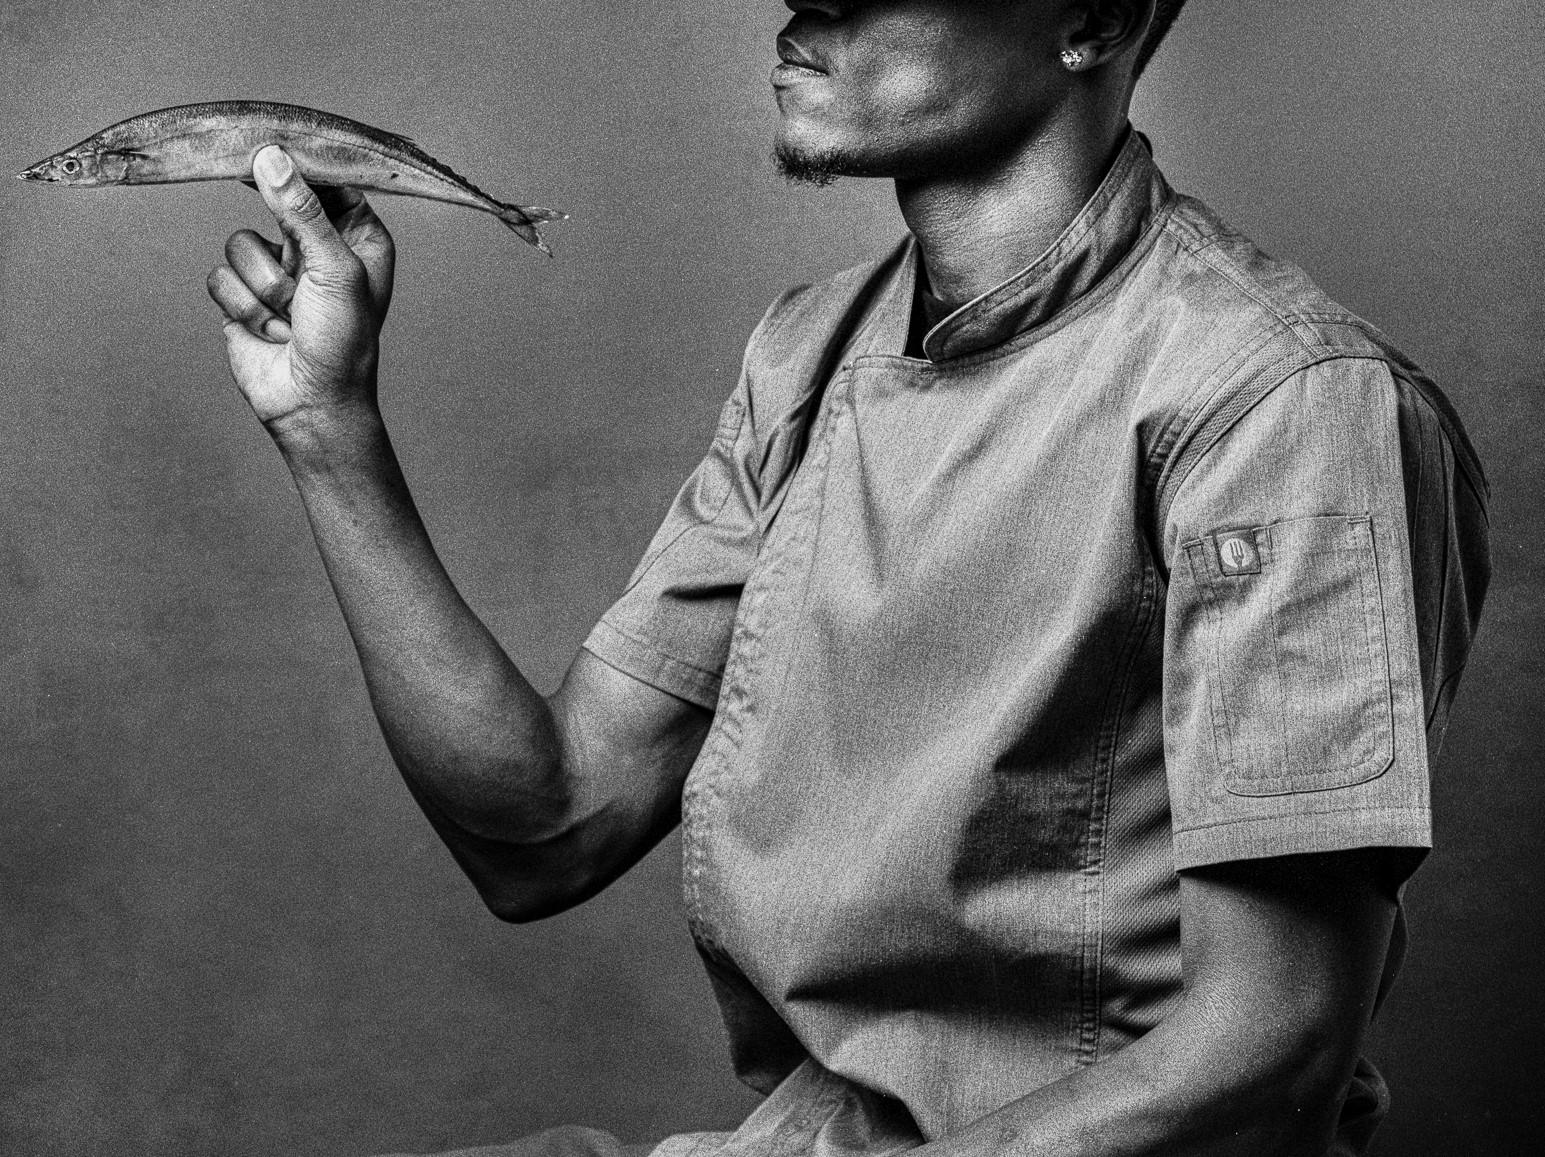 Tinker, Chef, Fish. Portrait Black and White Print - Gray Black and White Photograph by Shine Huang